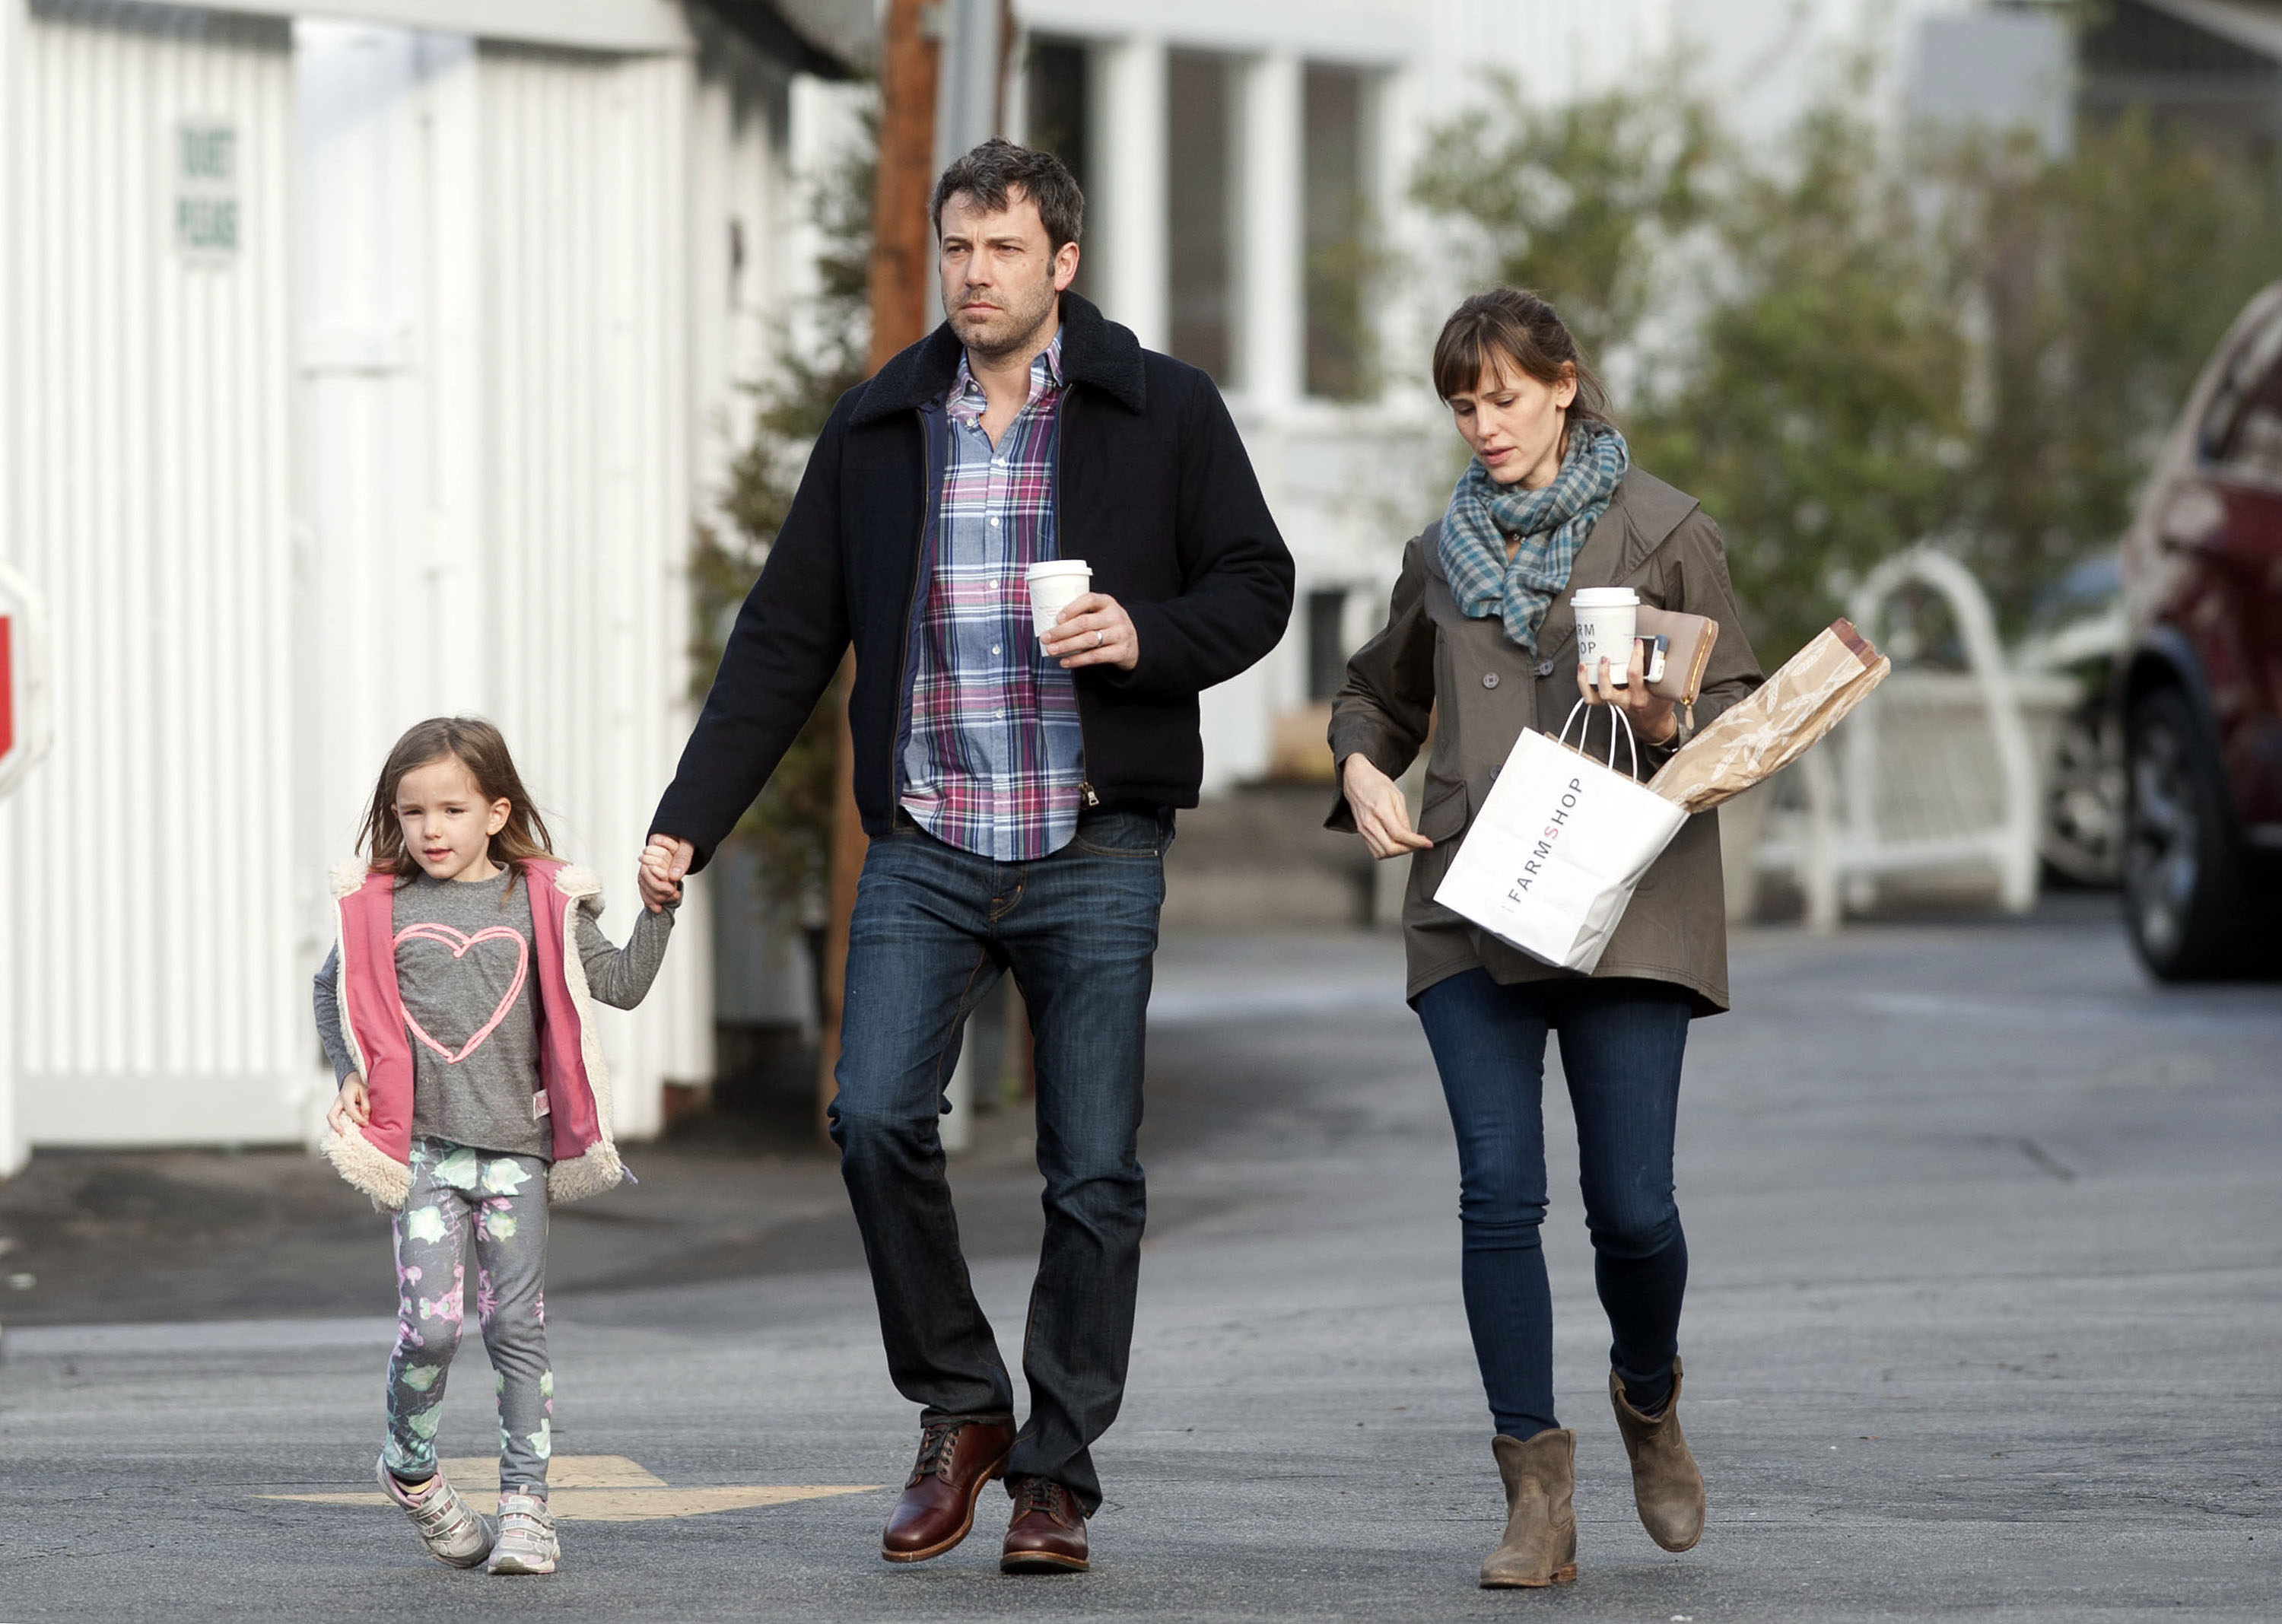 Seraphina Affleck, Ben Affleck and Jennifer Garner on February 6, 2014 in Los Angeles, California. | Source: Getty Images